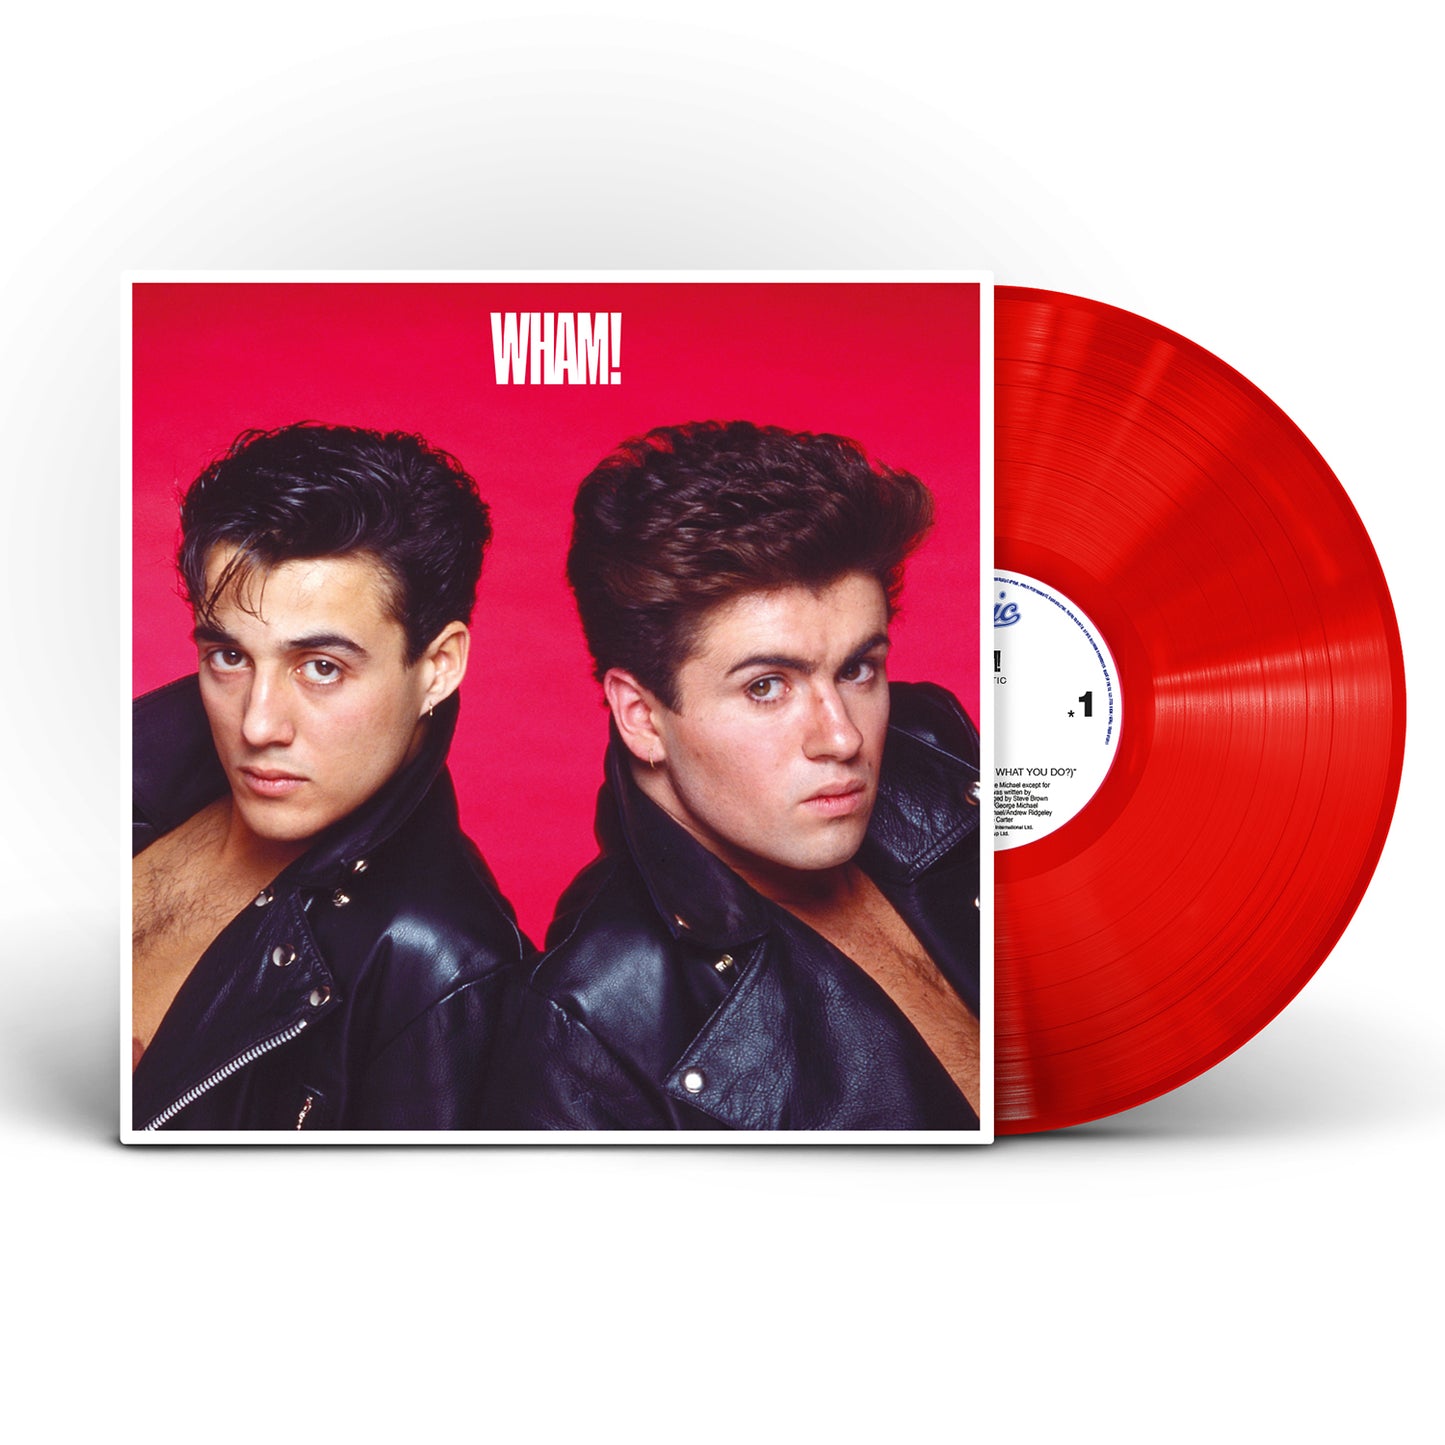 Wham! / Fantastic limited edition red vinyl reissue